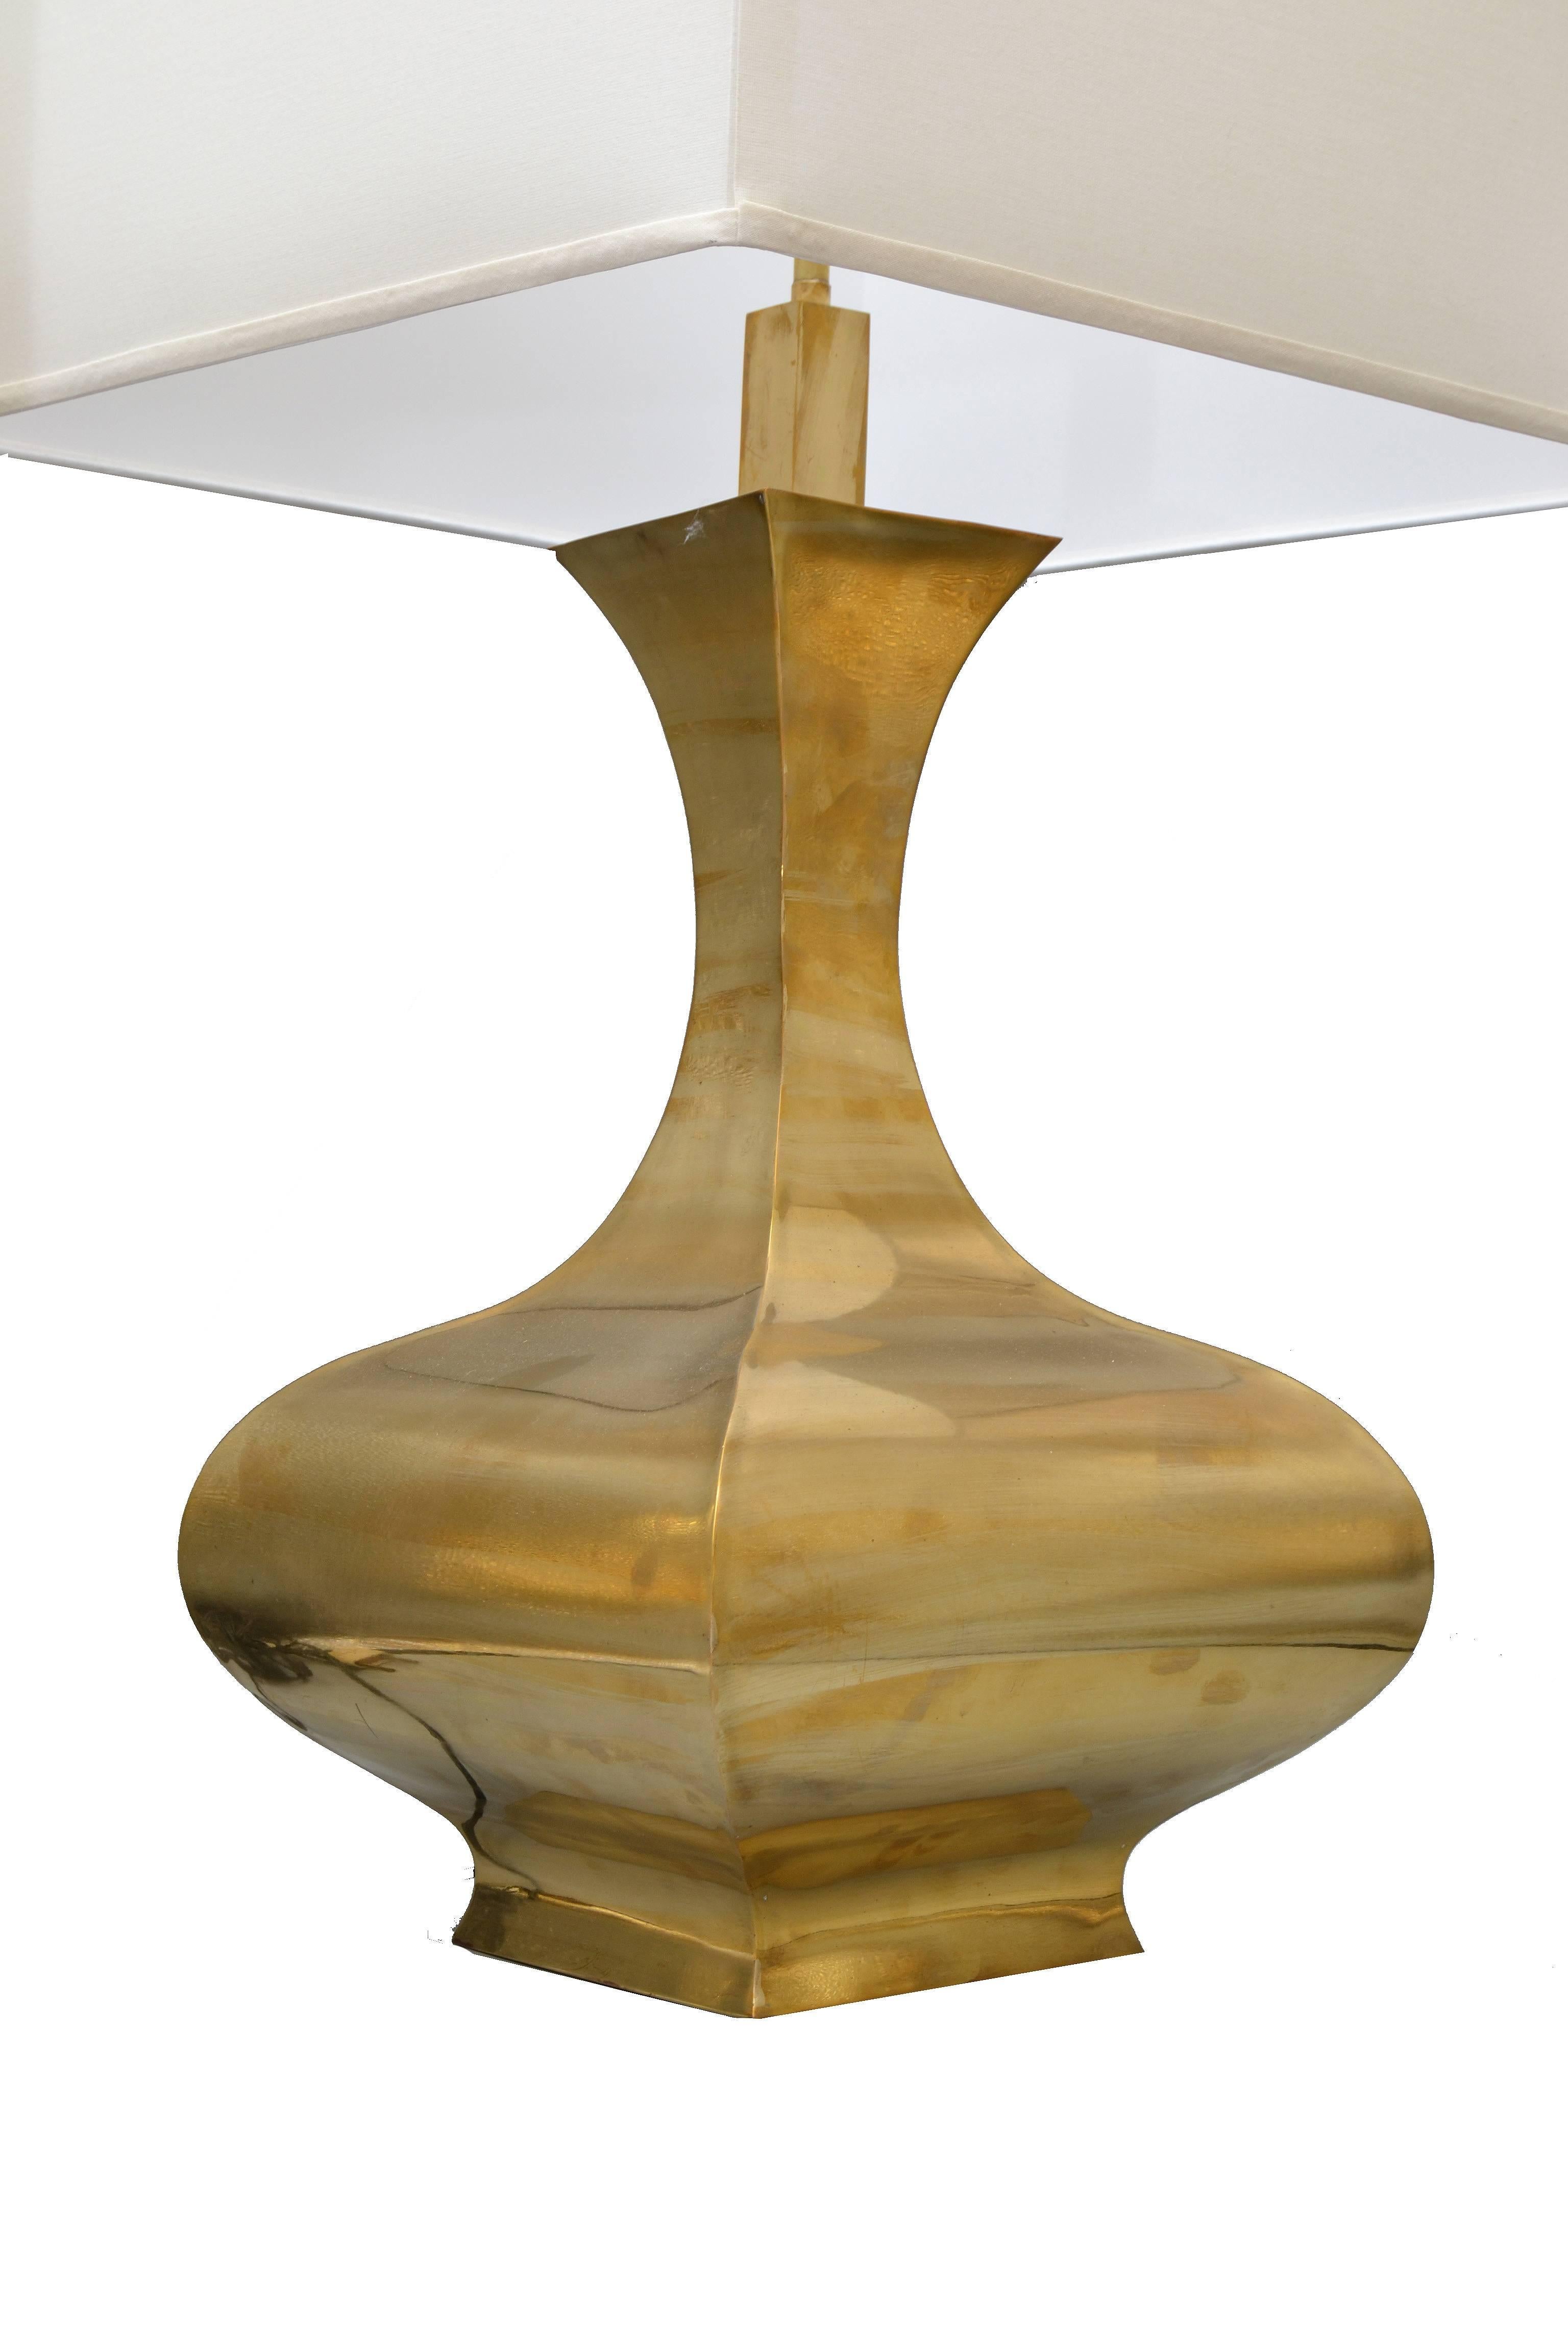 Mid-20th Century Pair, Tall Solid Brass Vessel Shape Table Lamps Shades Mid-Century Modern 1960s For Sale